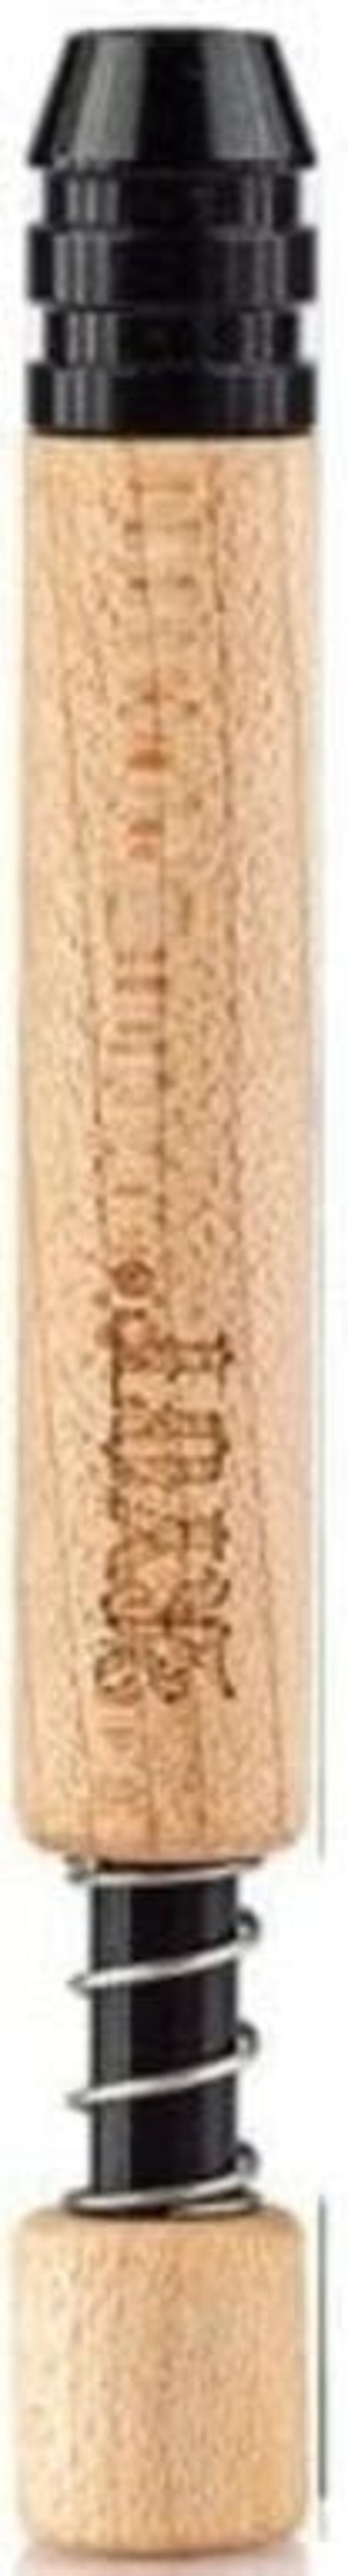 3" Wooden Taster Bat with Spring Ejection - Maple